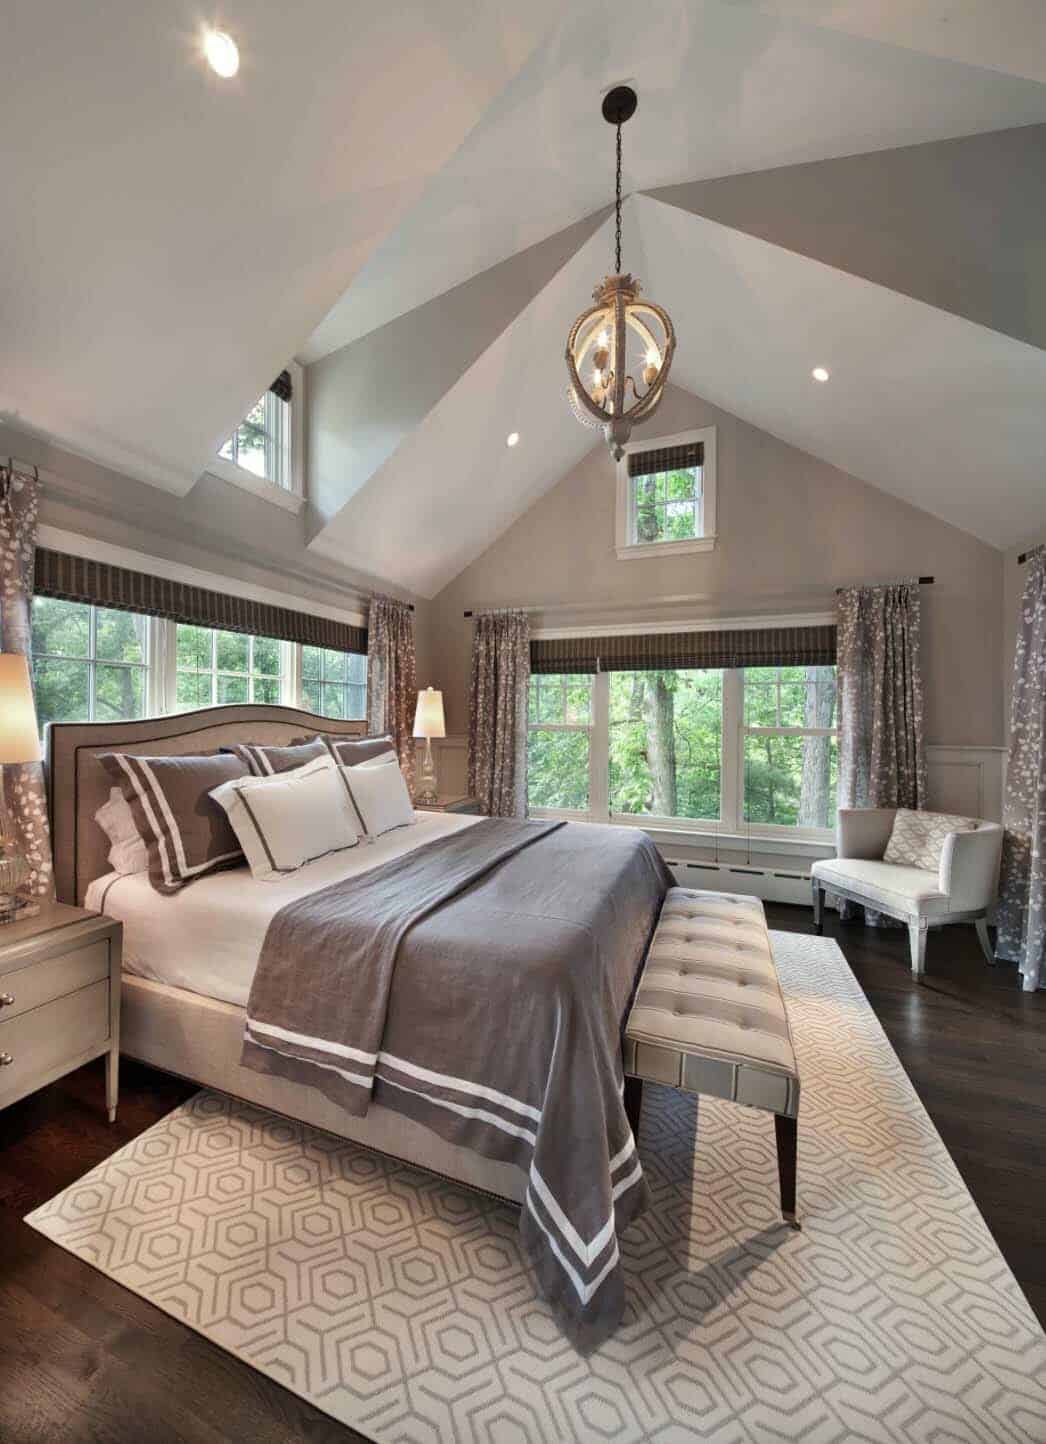 25 Absolutely Stunning Master Bedroom Color Scheme Ideas